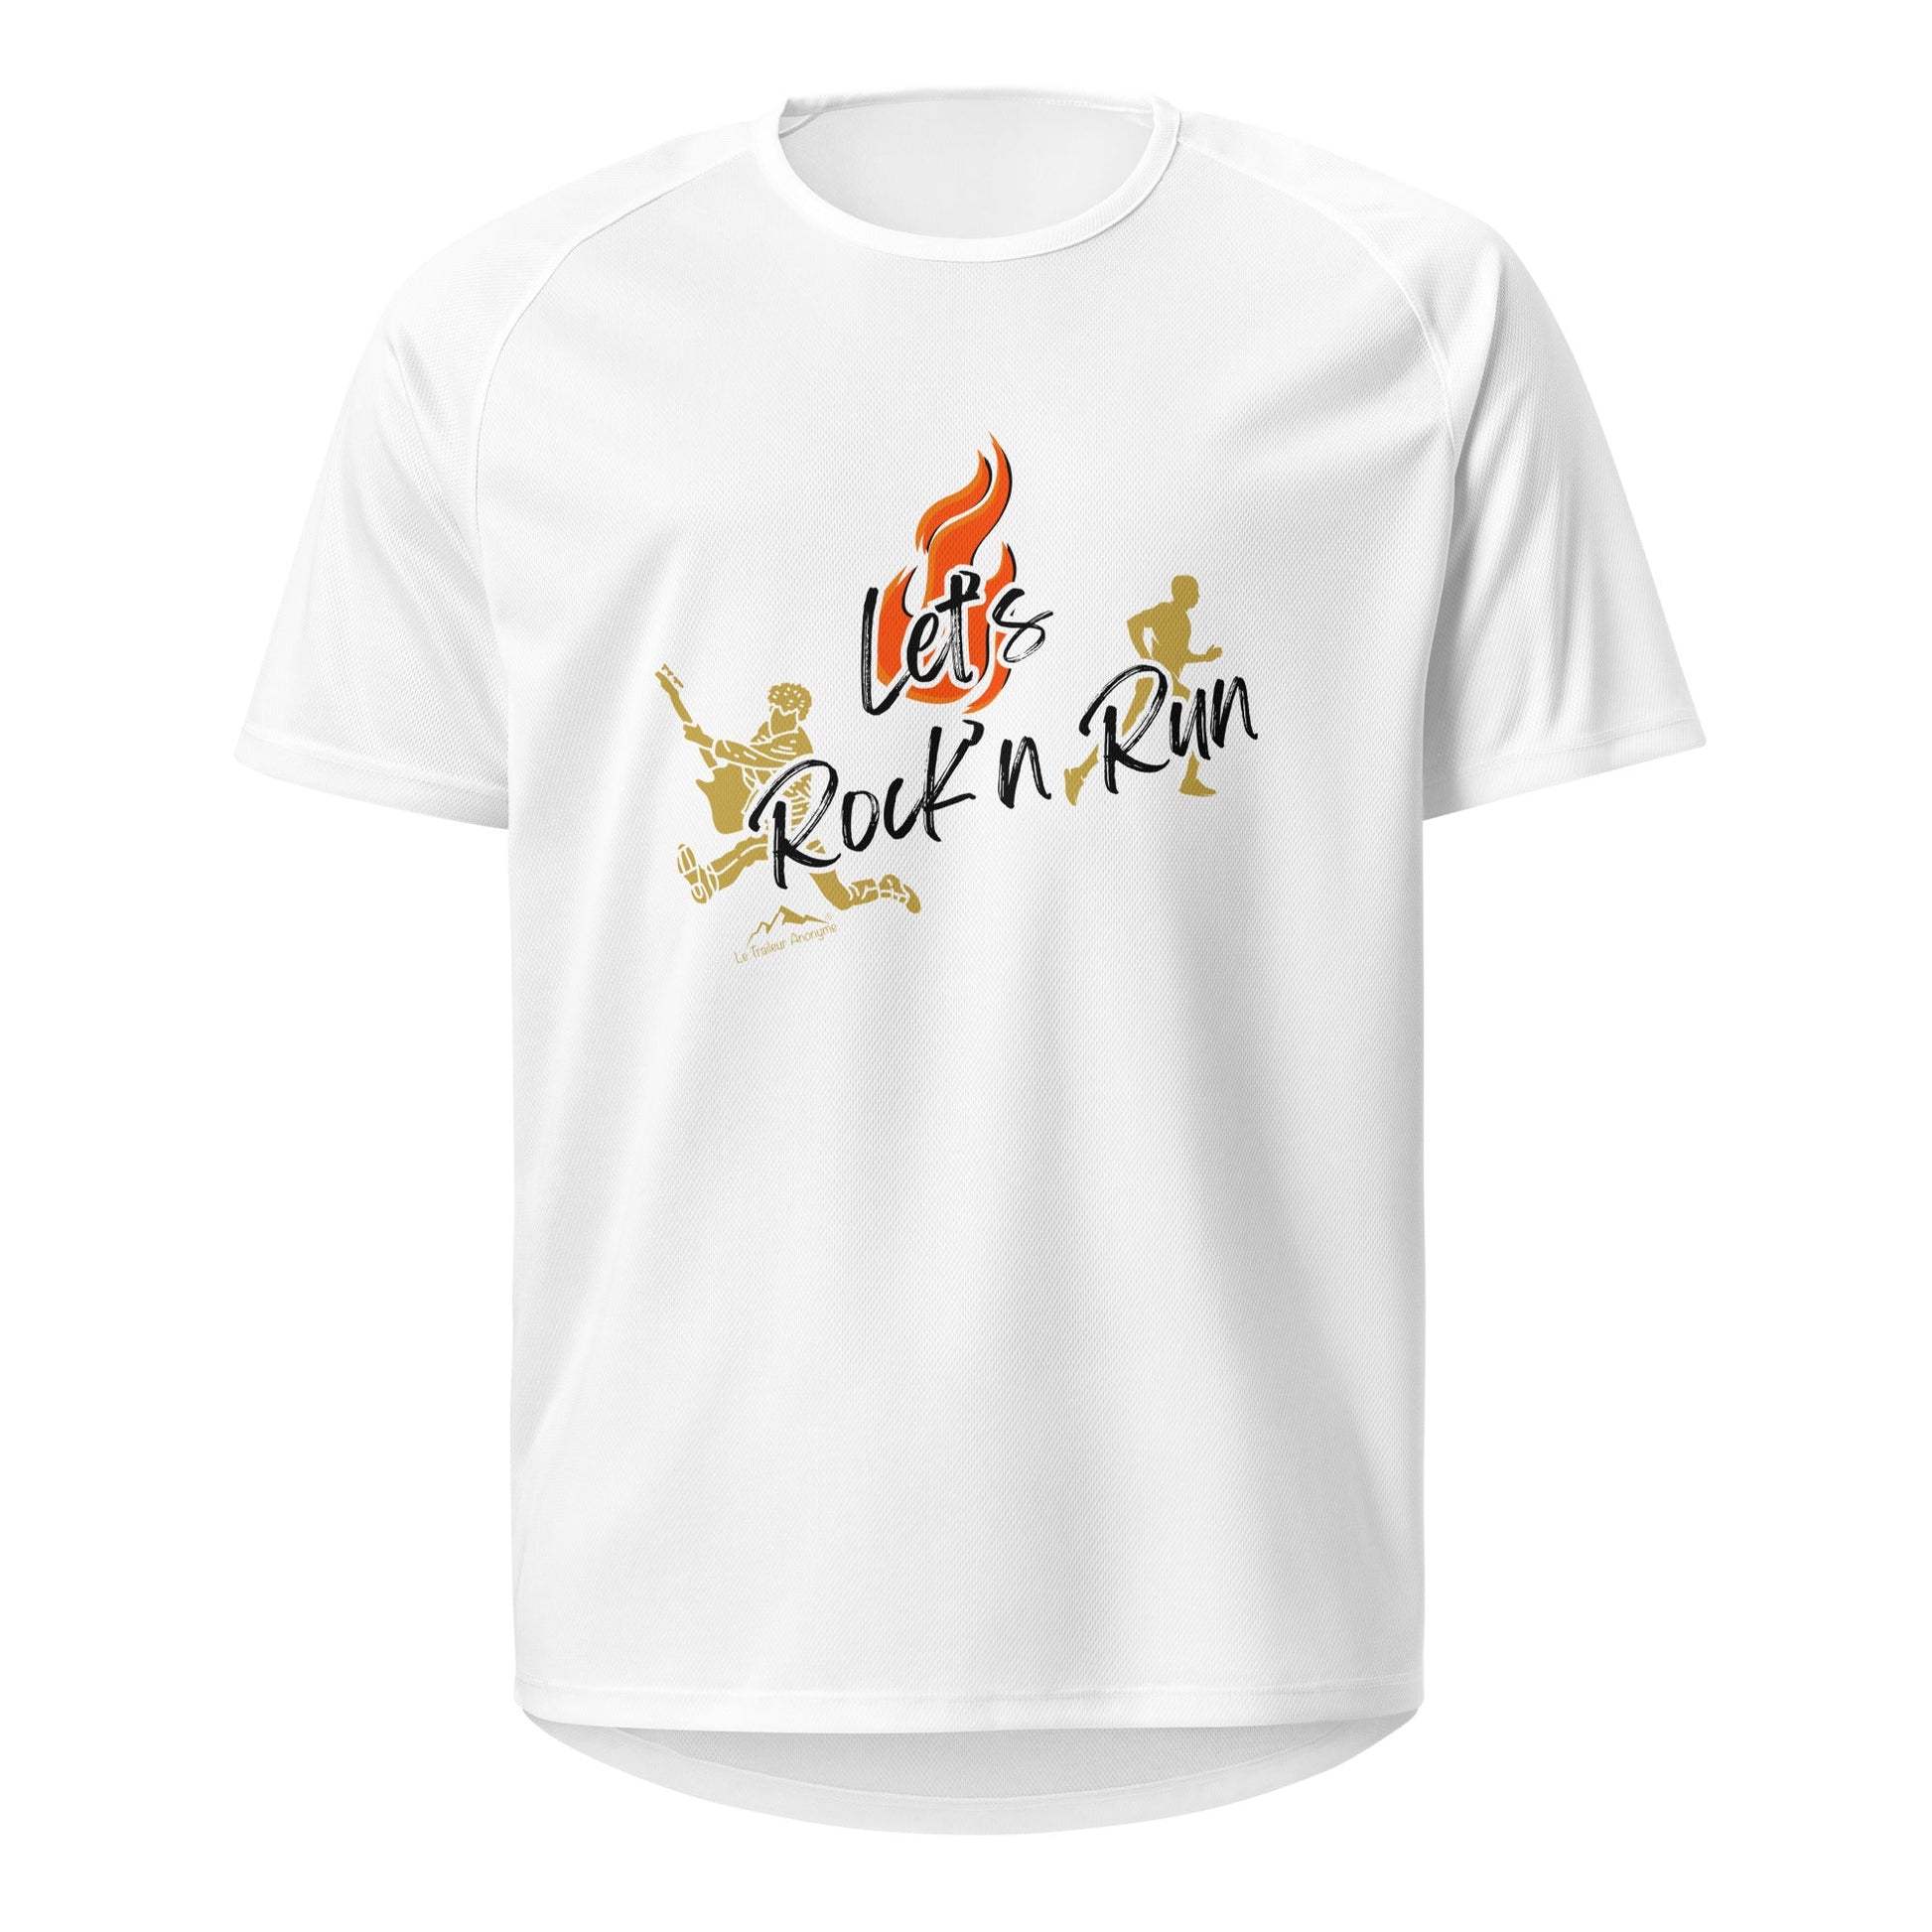 T-Shirt Running Maille Basic - Unisexe - Collection Rock'n Run - Le Traileur Anonyme